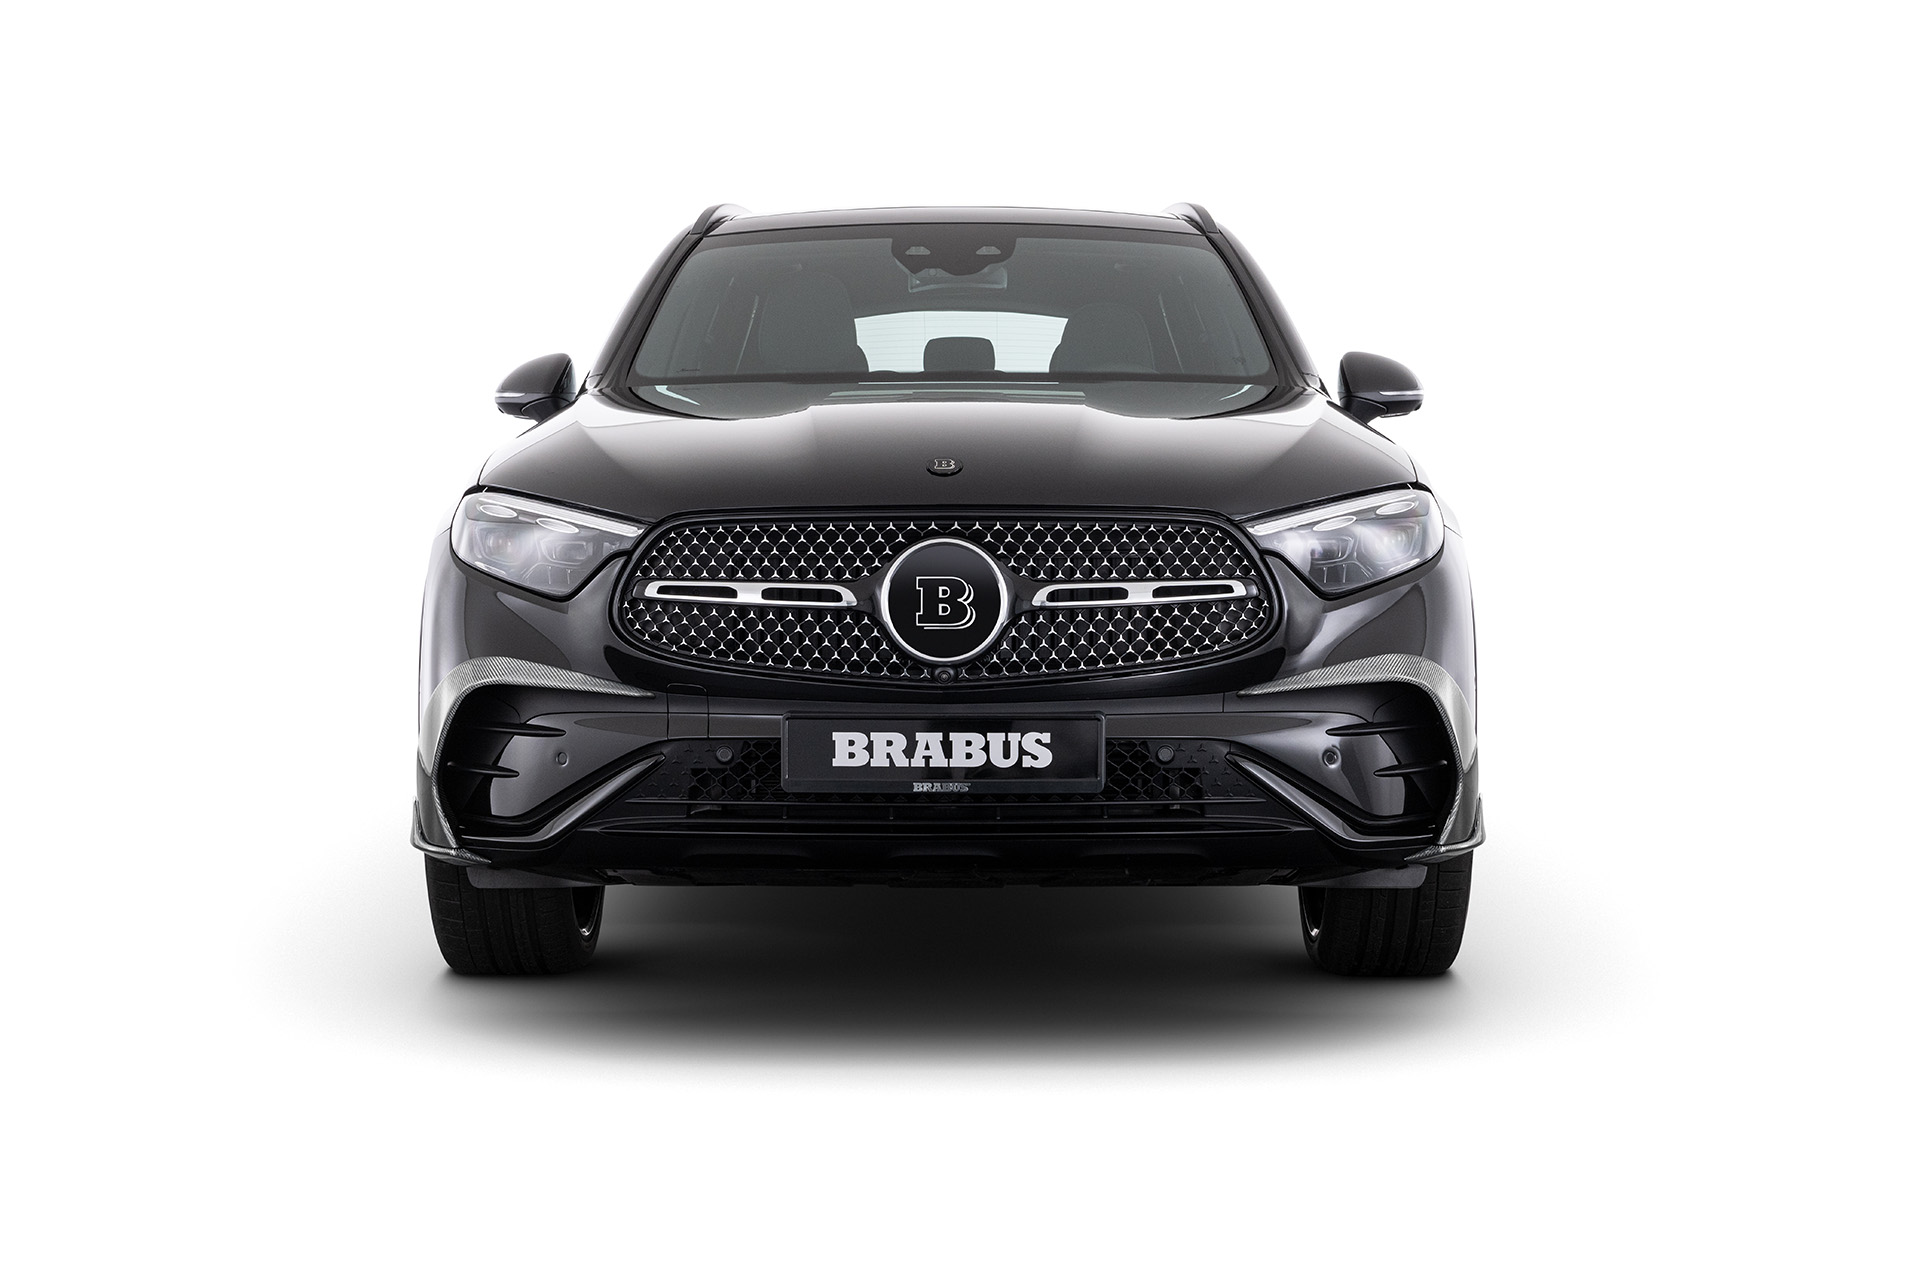 Overview - For Mercedes - Tuning - Cars - BRABUS